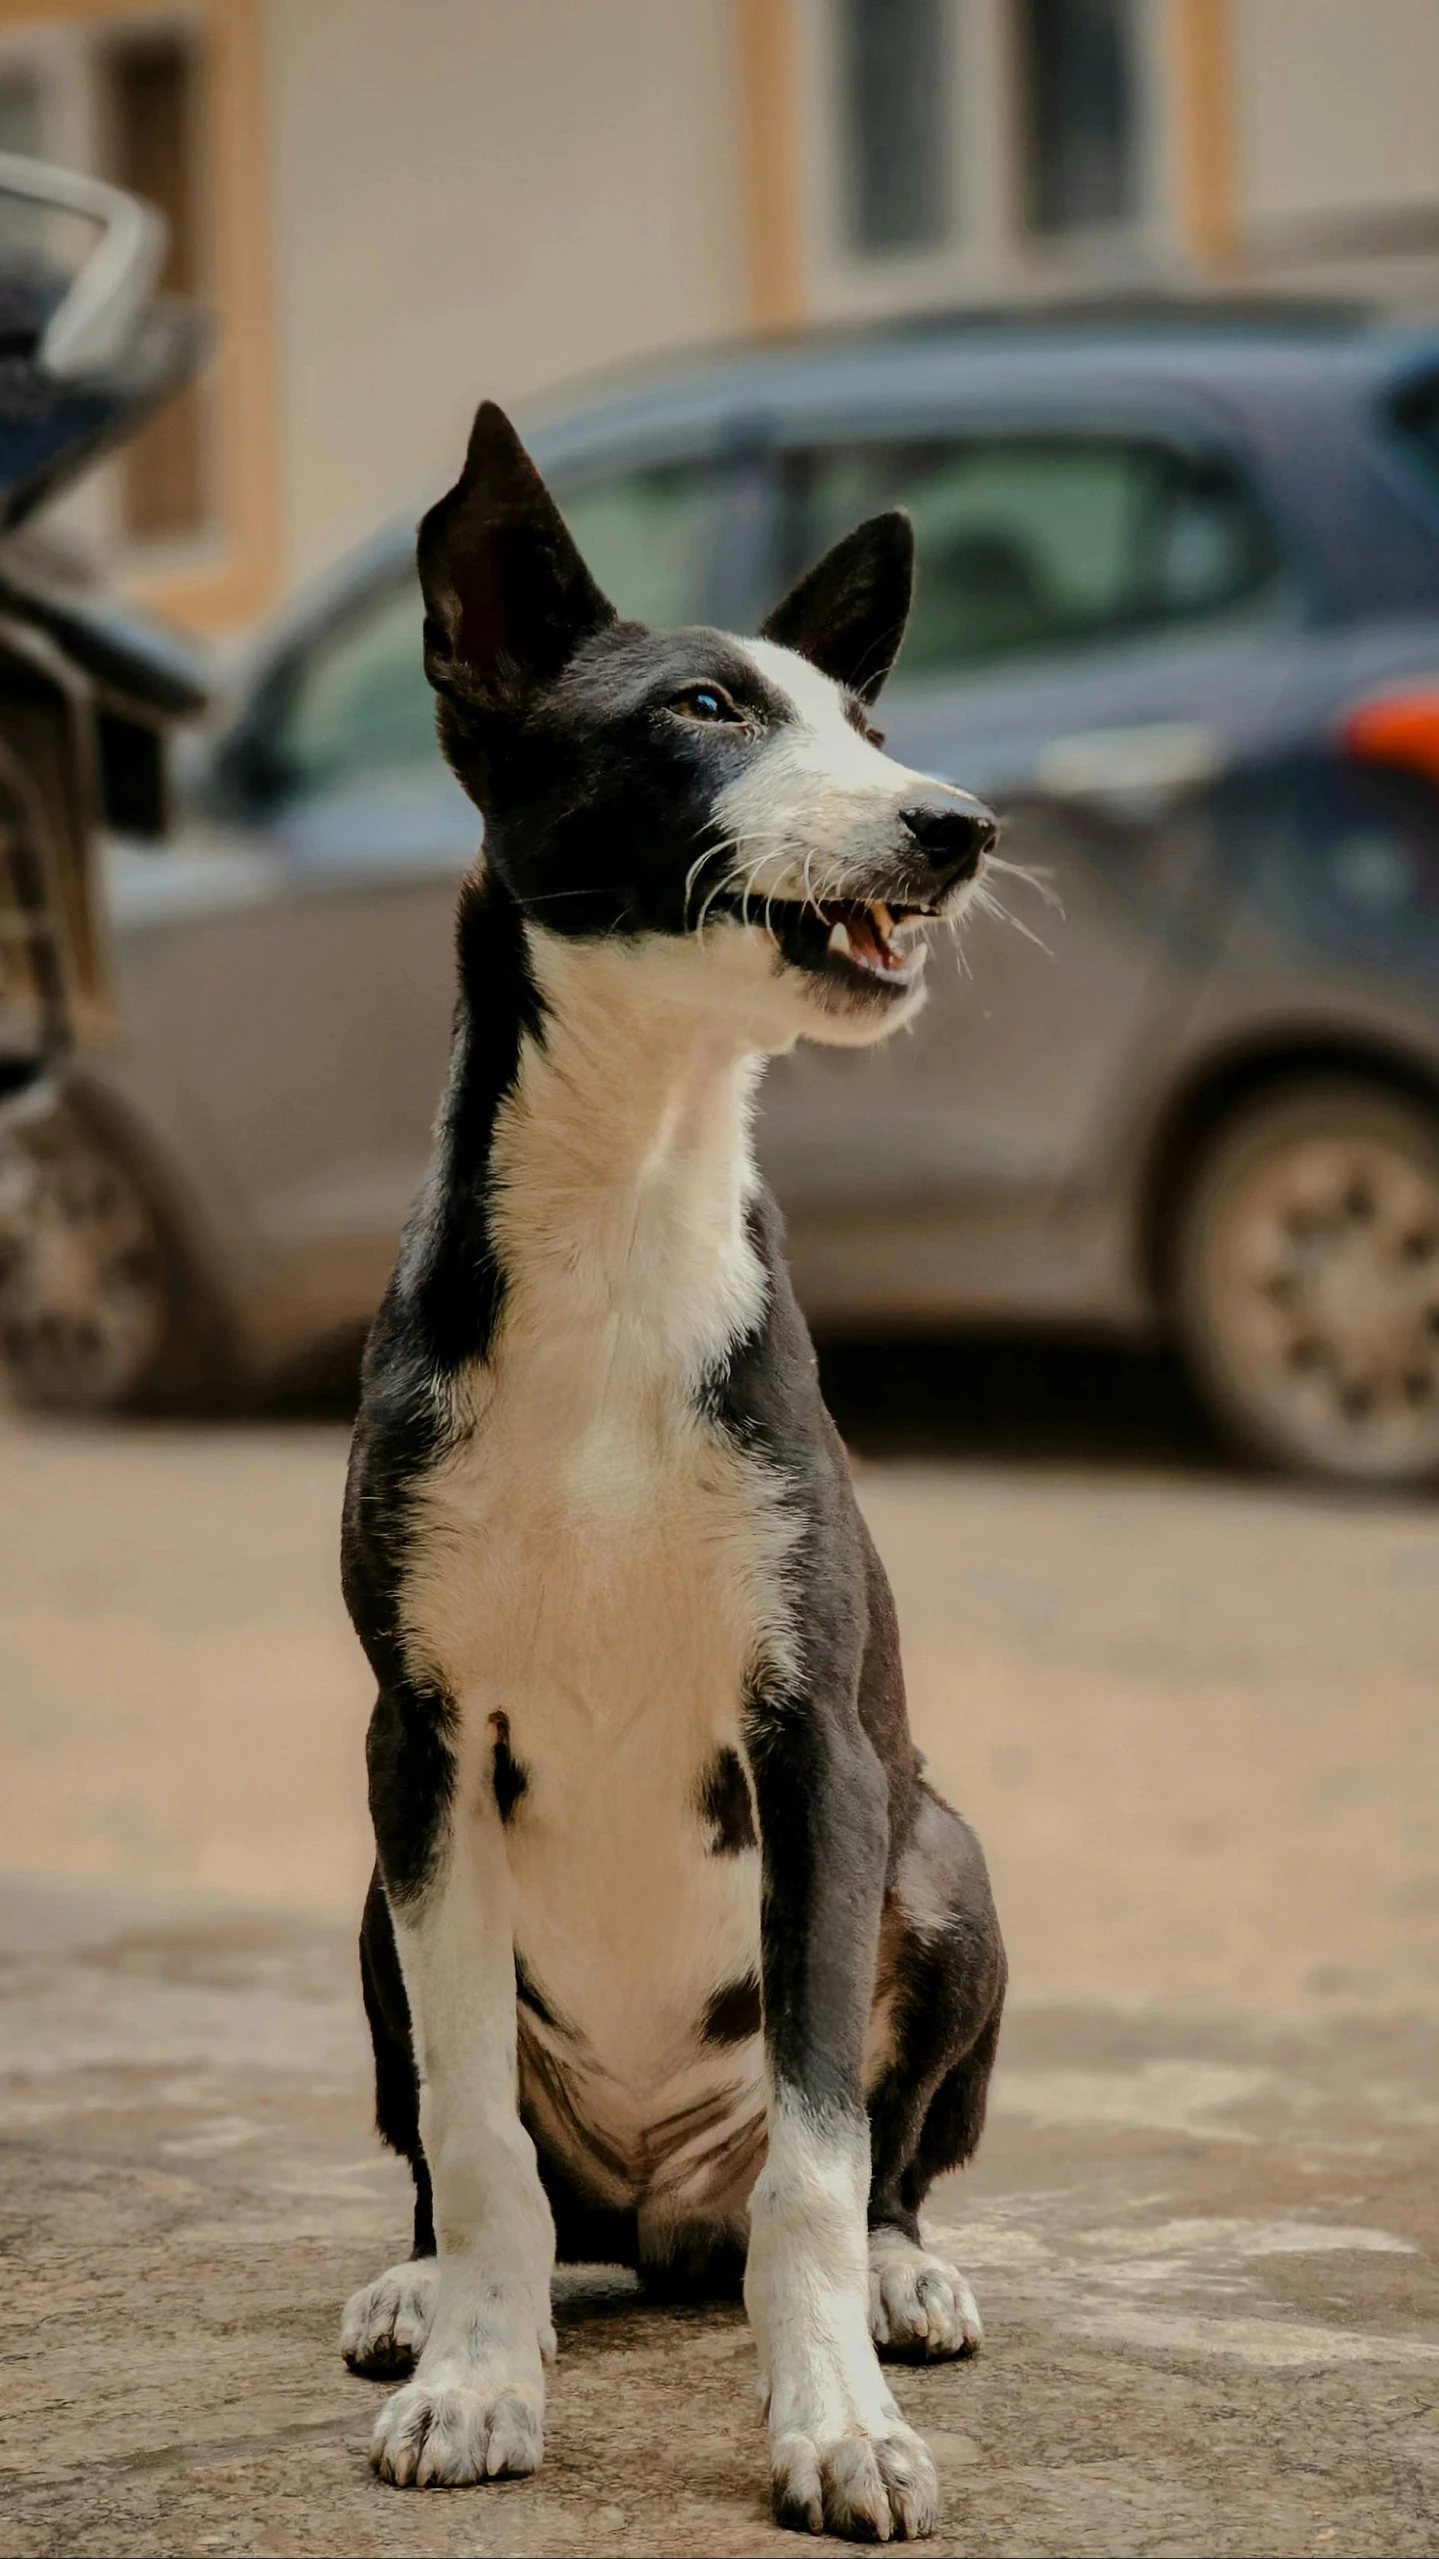 a black and white dog is sitting in the street